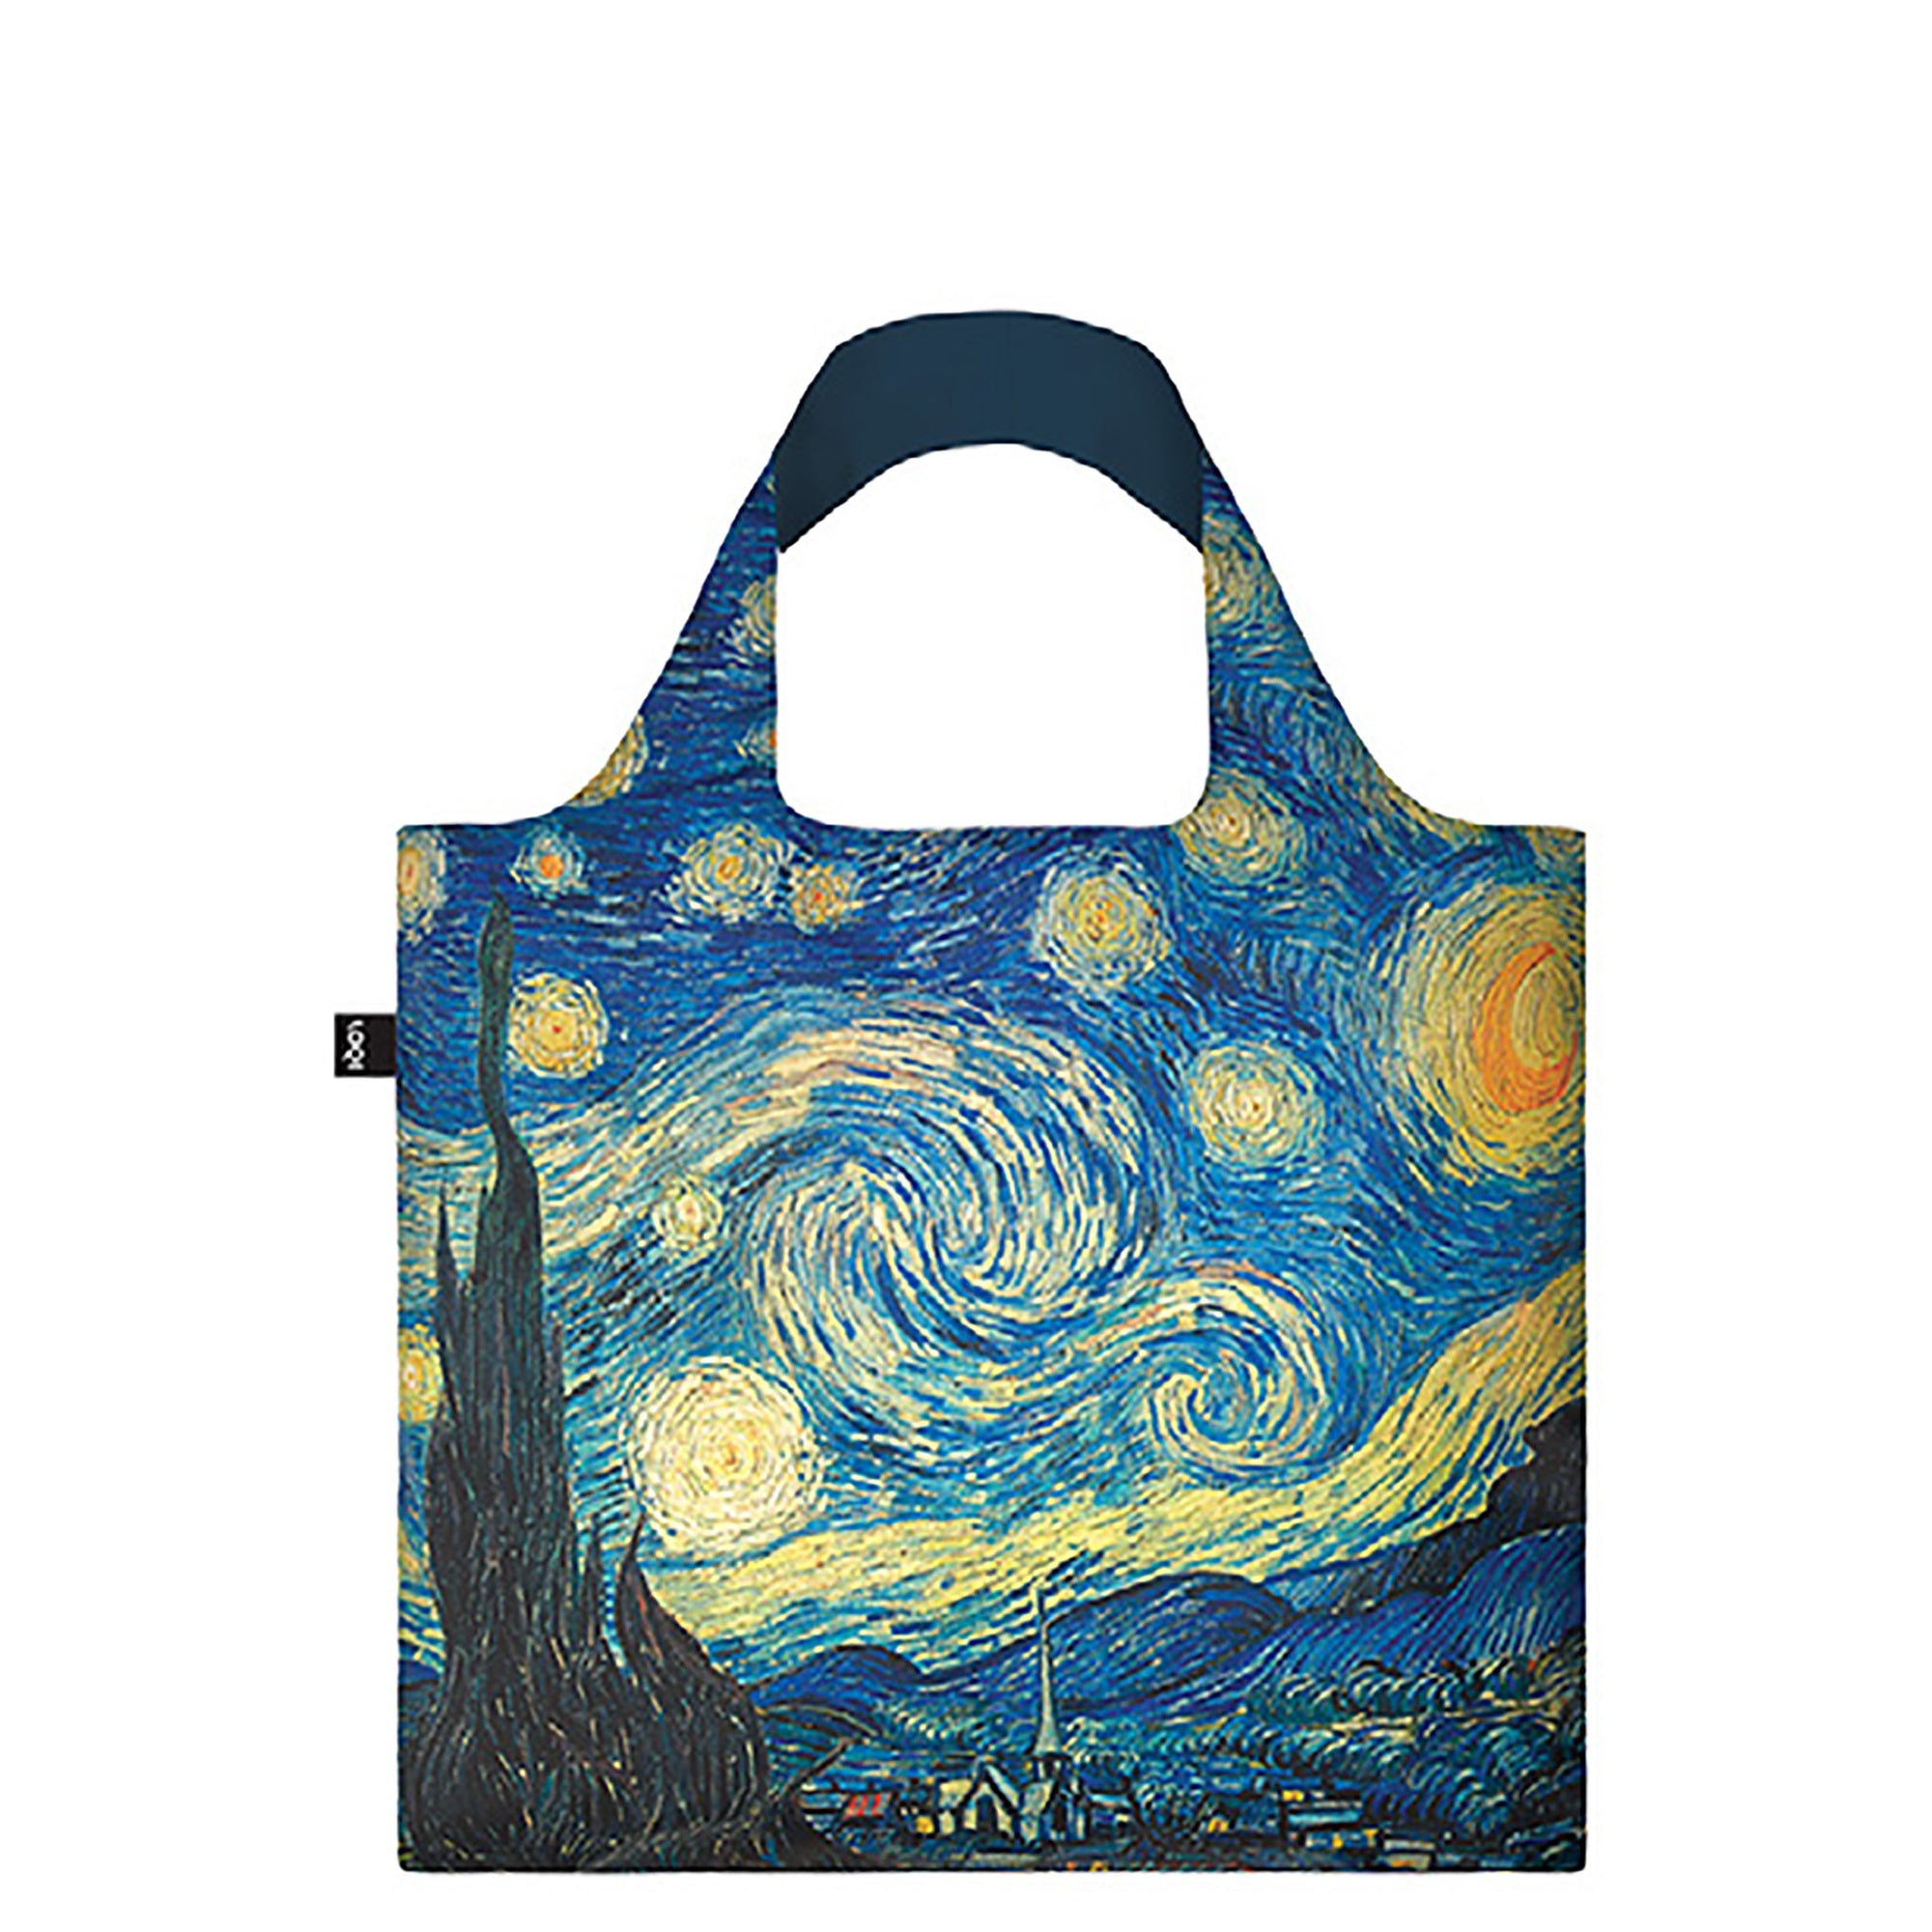 New Van Gogh Art Oil Parinting Keychain Card Holder Keychains The Starry  Night Holders Bank Bus ID Credit Cards Key Ring Chains